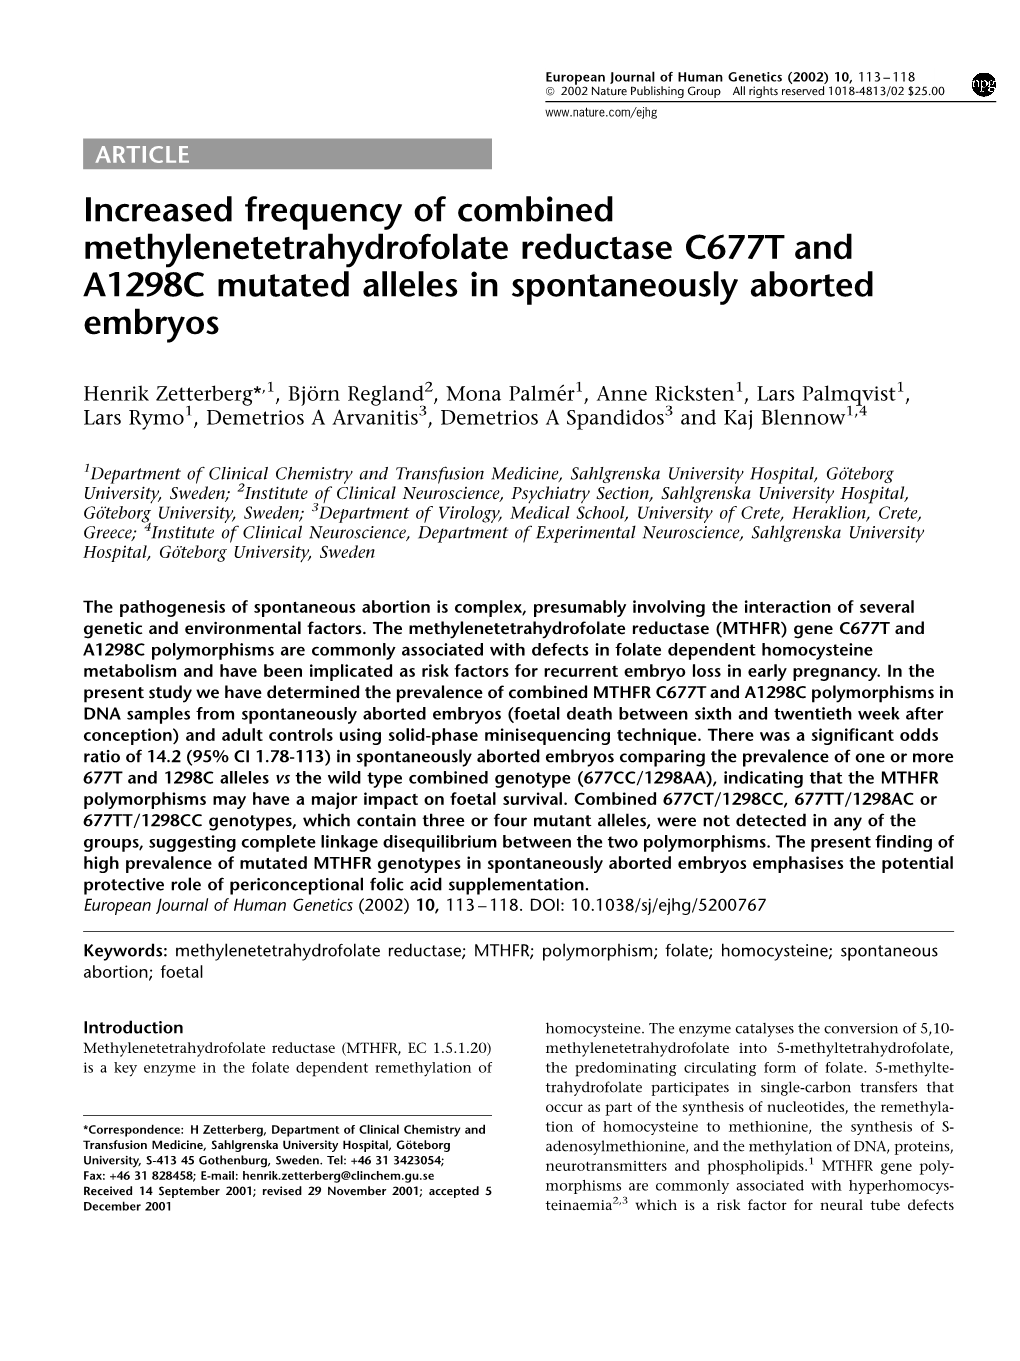 Increased Frequency of Combined Methylenetetrahydrofolate Reductase C677T and A1298C Mutated Alleles in Spontaneously Aborted Embryos